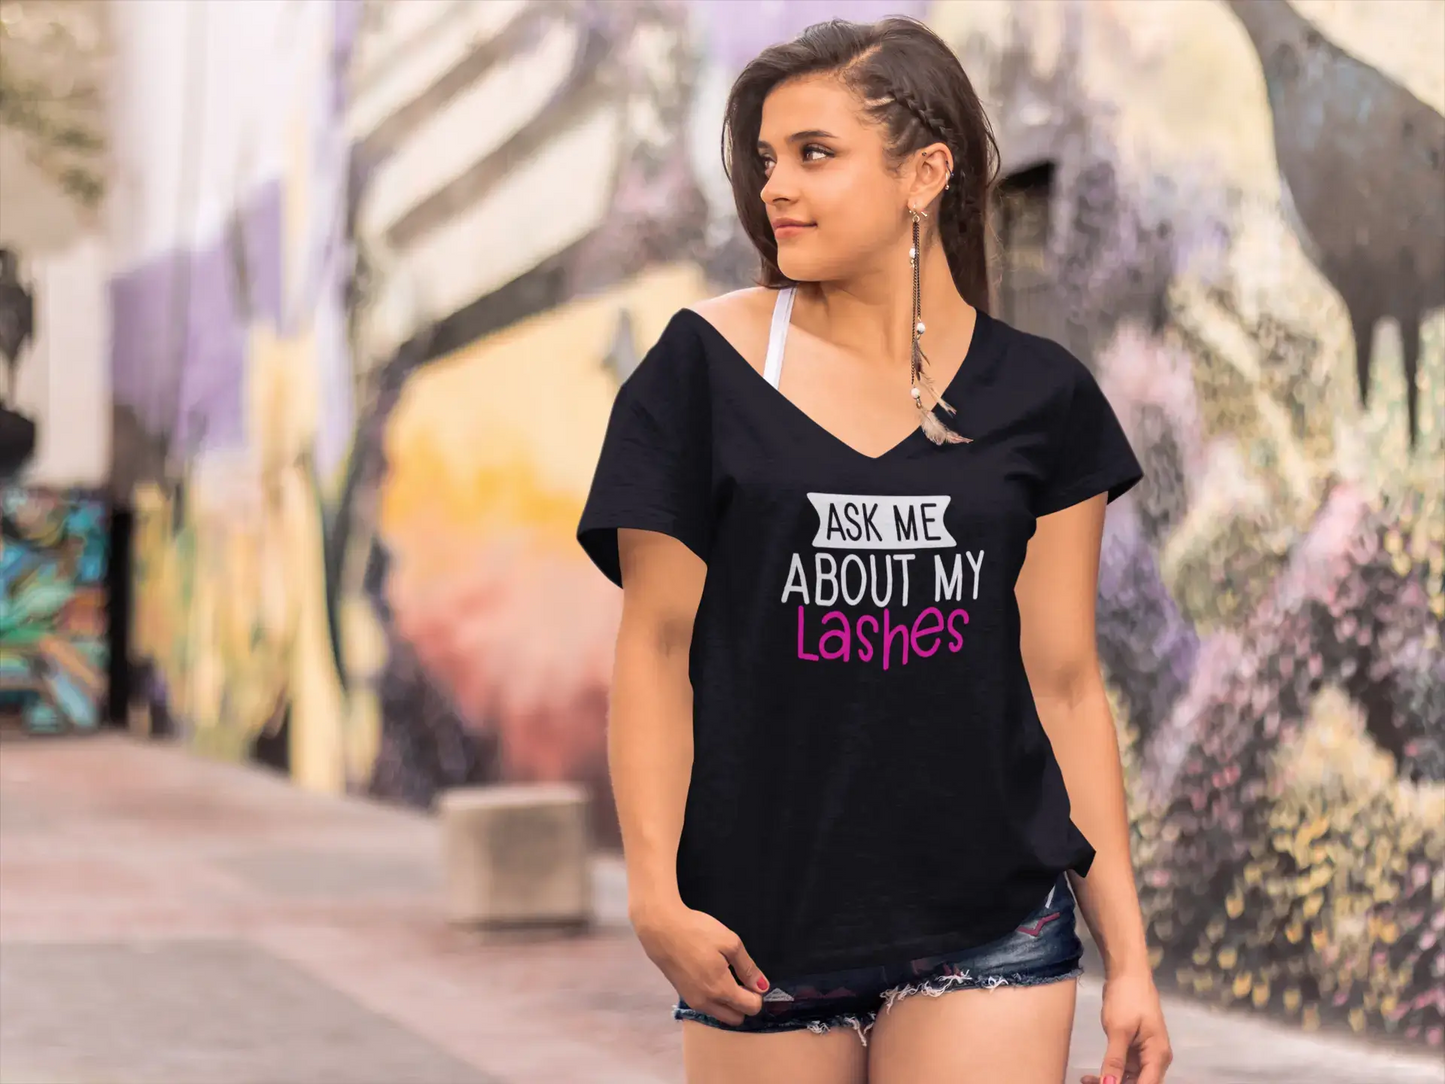 ULTRABASIC Women's Novelty T-Shirt Ask Me About My Lashes - Make Up Quote